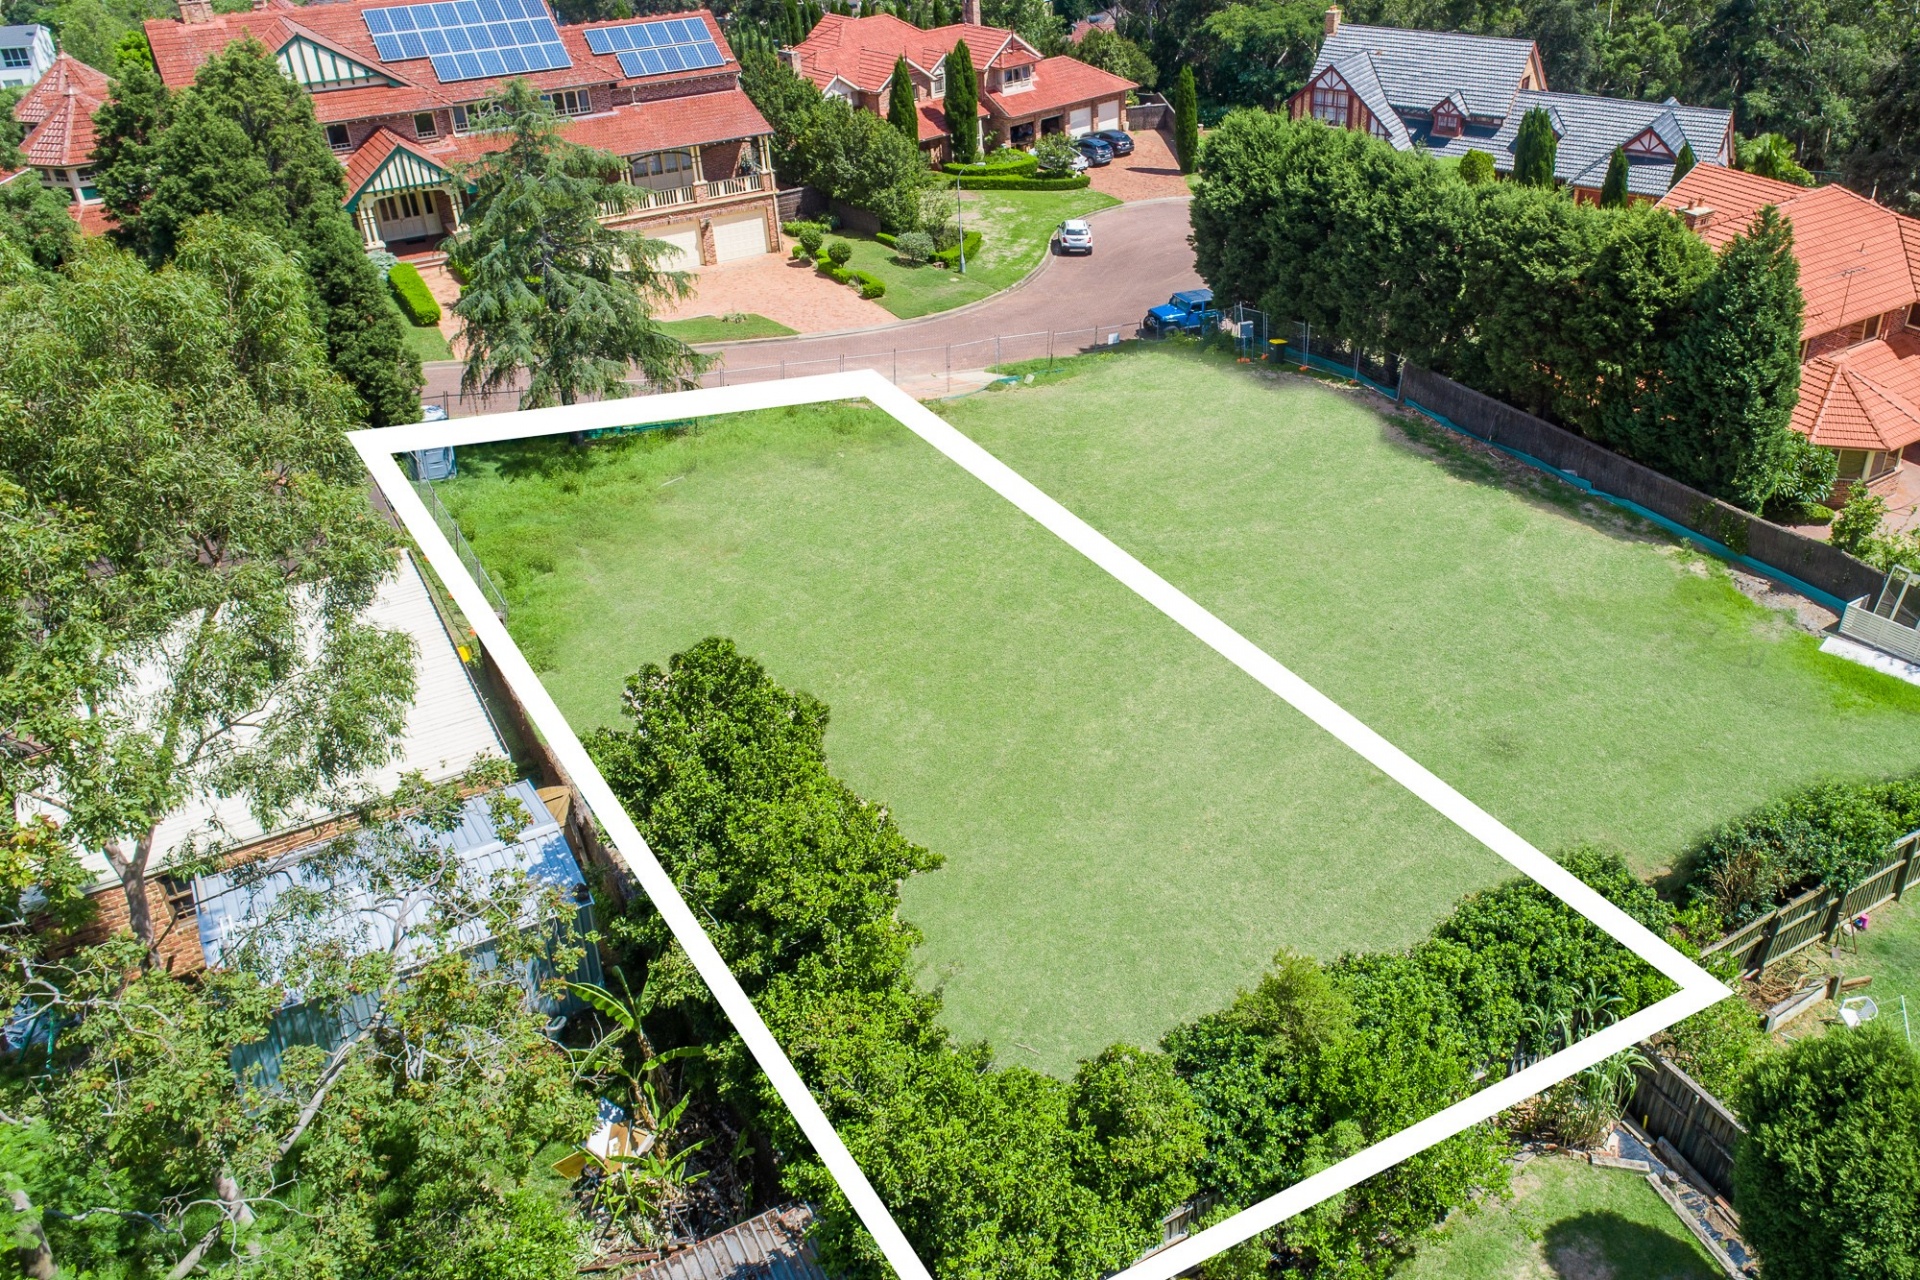 Land, Sold , Heritage Court , Listing ID 1363, Castle Hill, NSW , Australia, 2154,